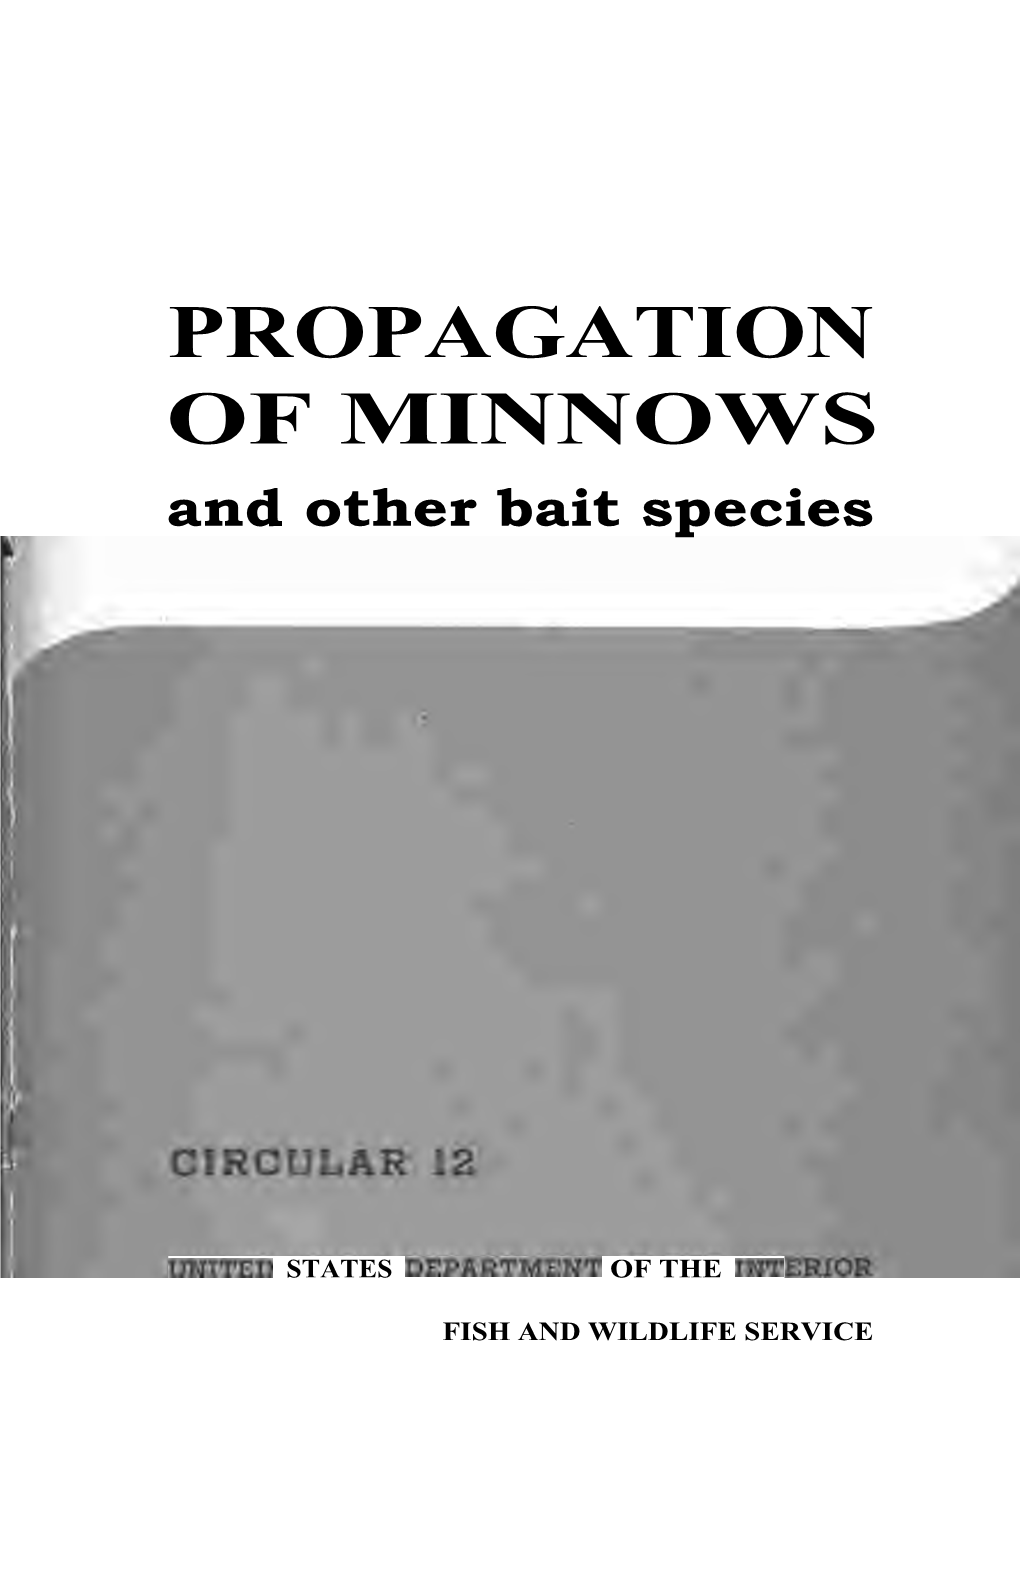 PROPAGATION of MINNOWS and Other Bait Species